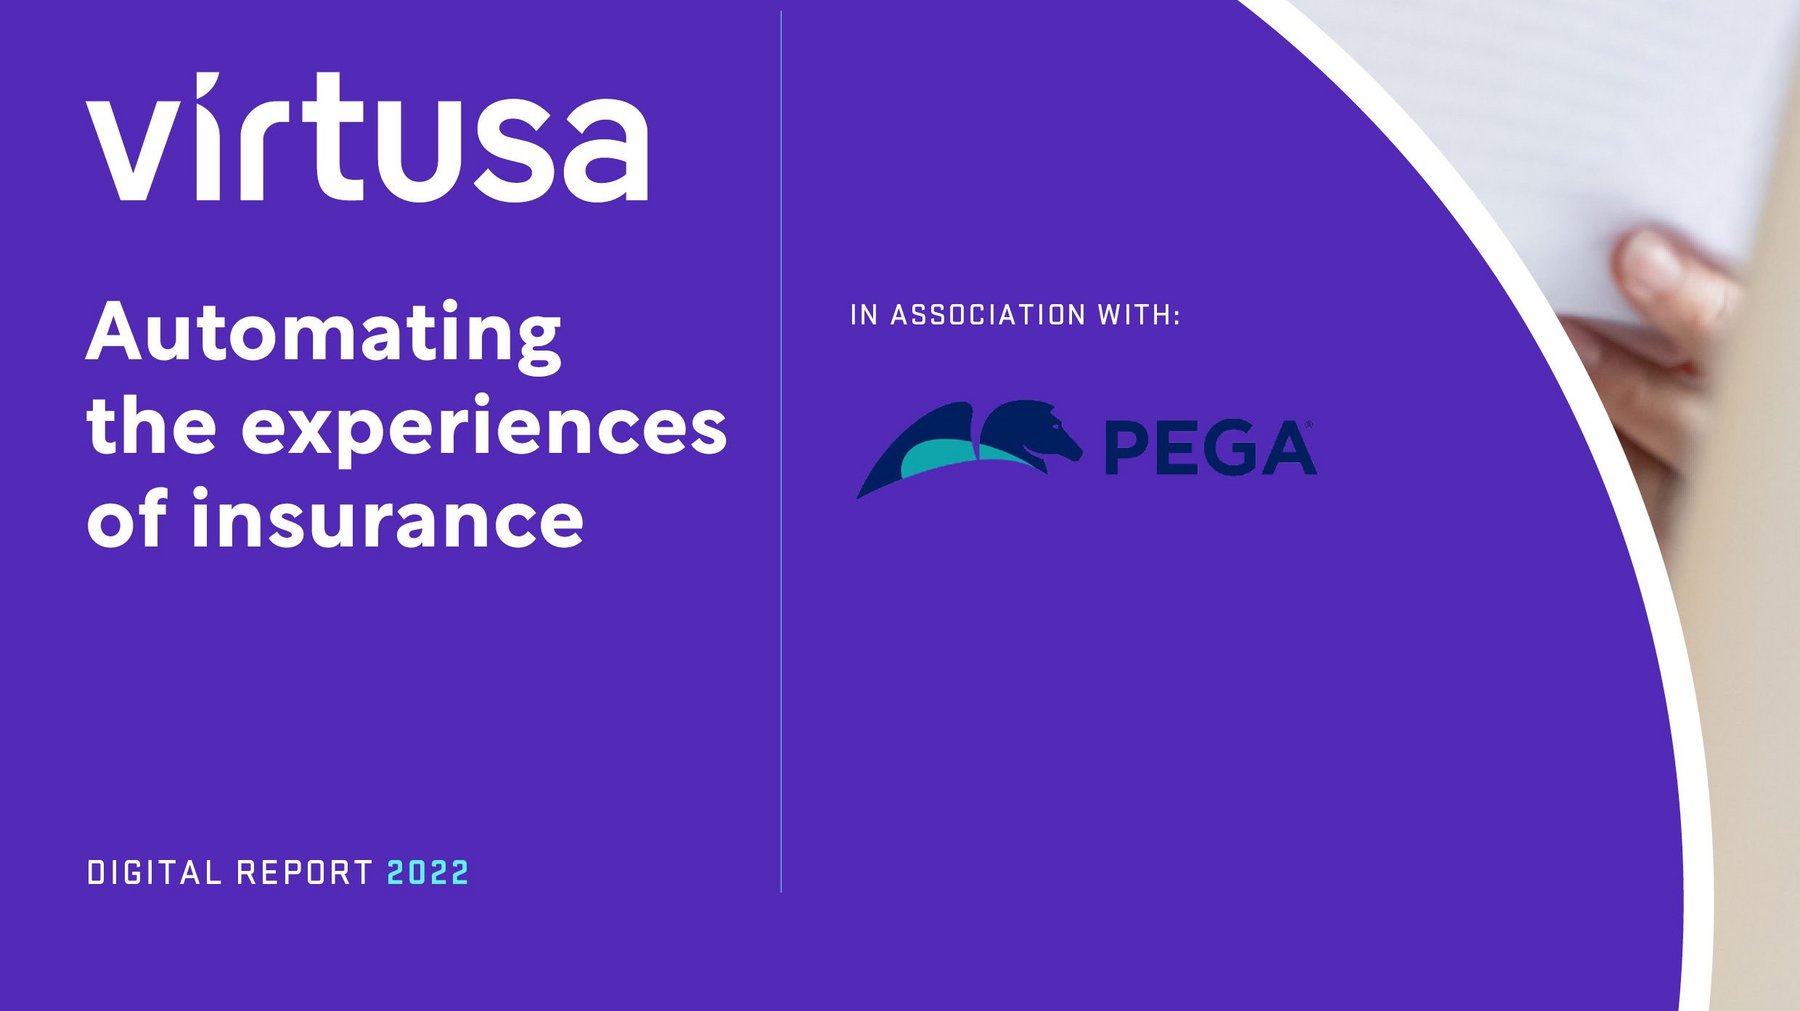 Virtusa and Pegasystems at the service of global insurance InsurTech